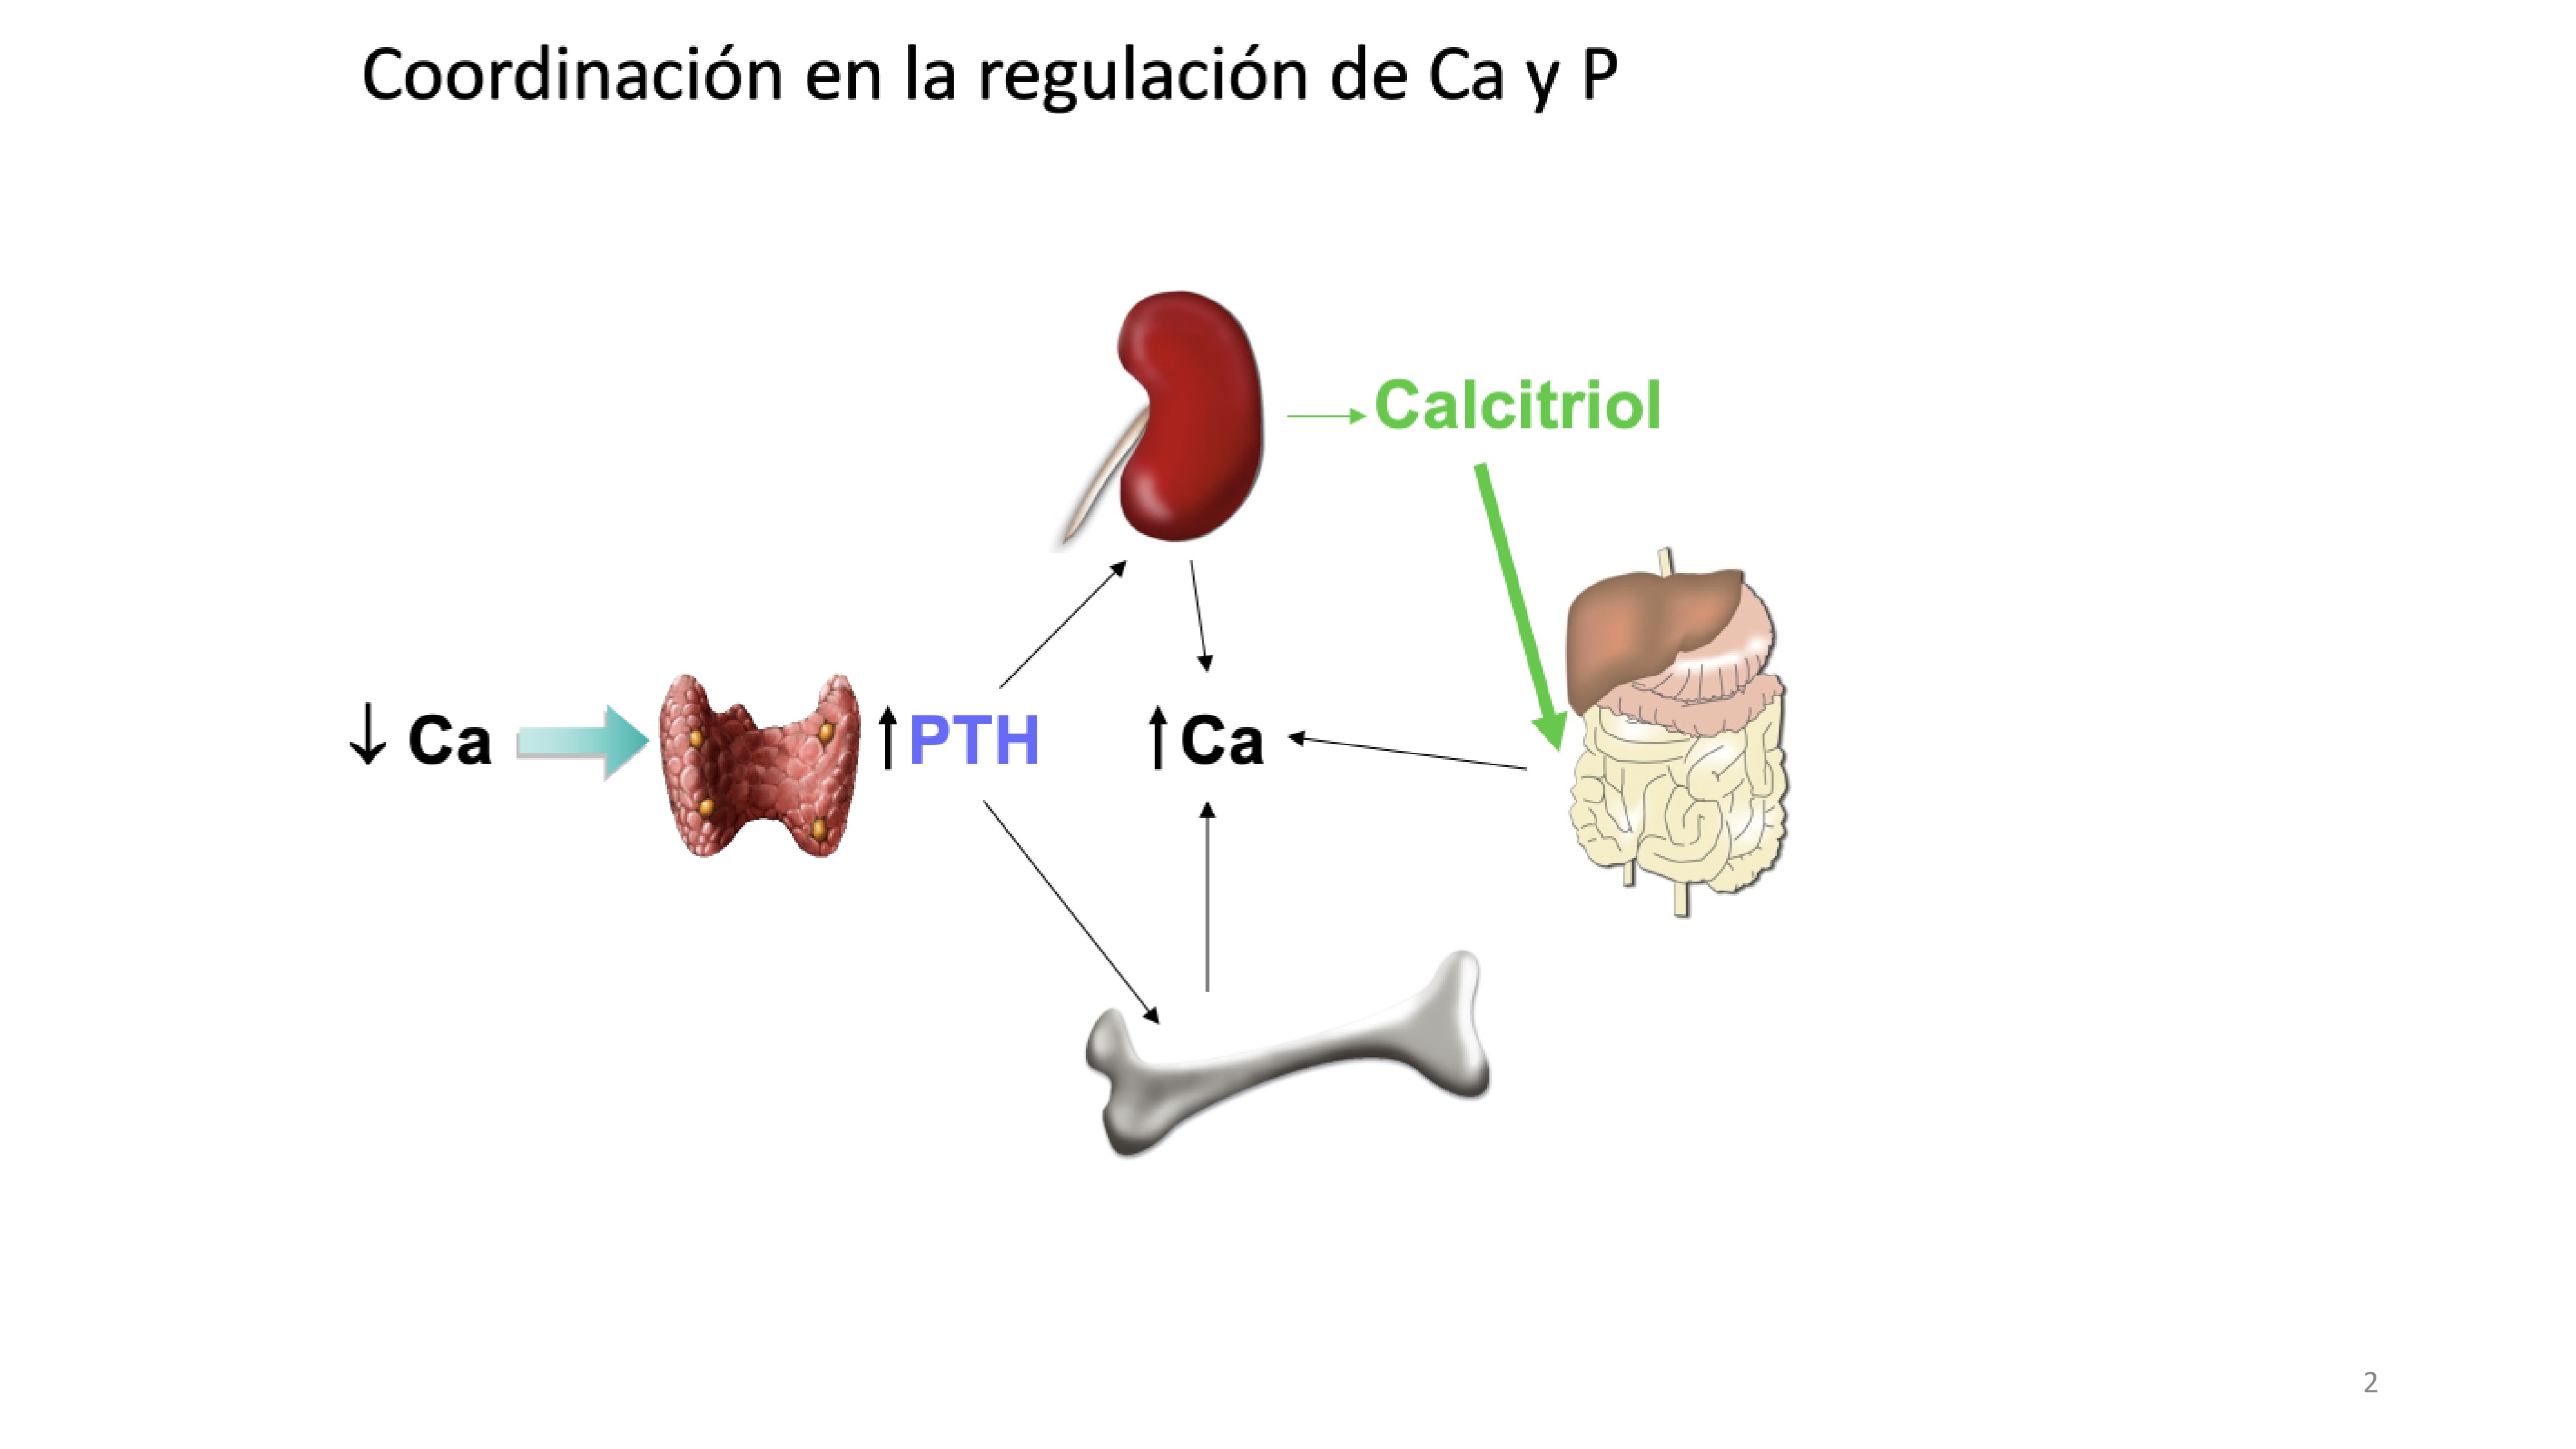 A decrease in calcium concentration stimulates PTH production and secretion. The parathyroid cell contains calcium sensors in the membrane that 